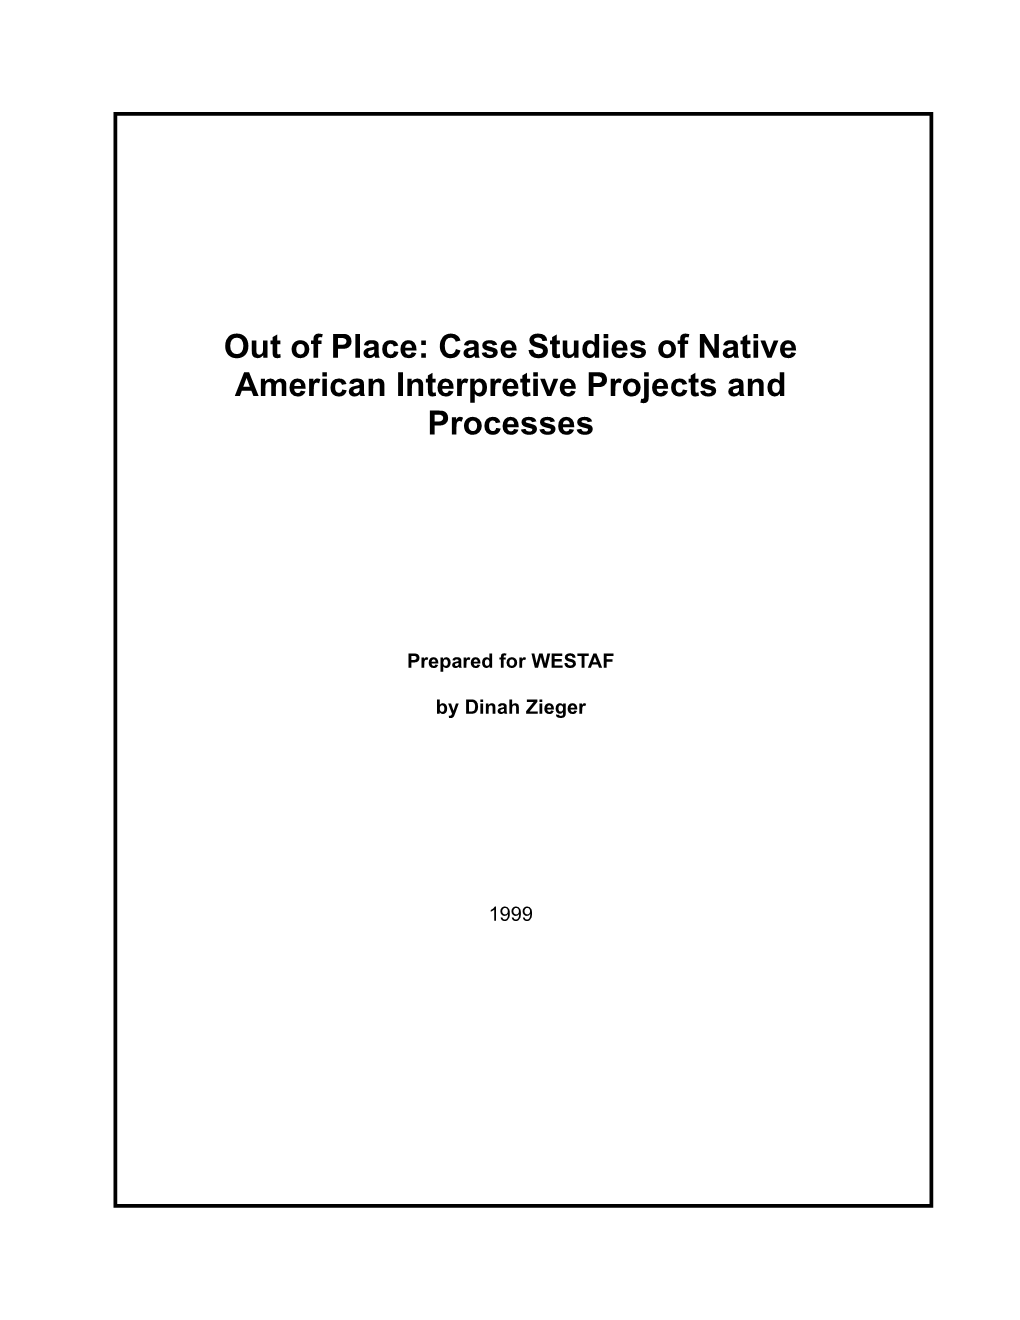 Out of Place: Case Studies of Native American Interpretive Projects and Processes